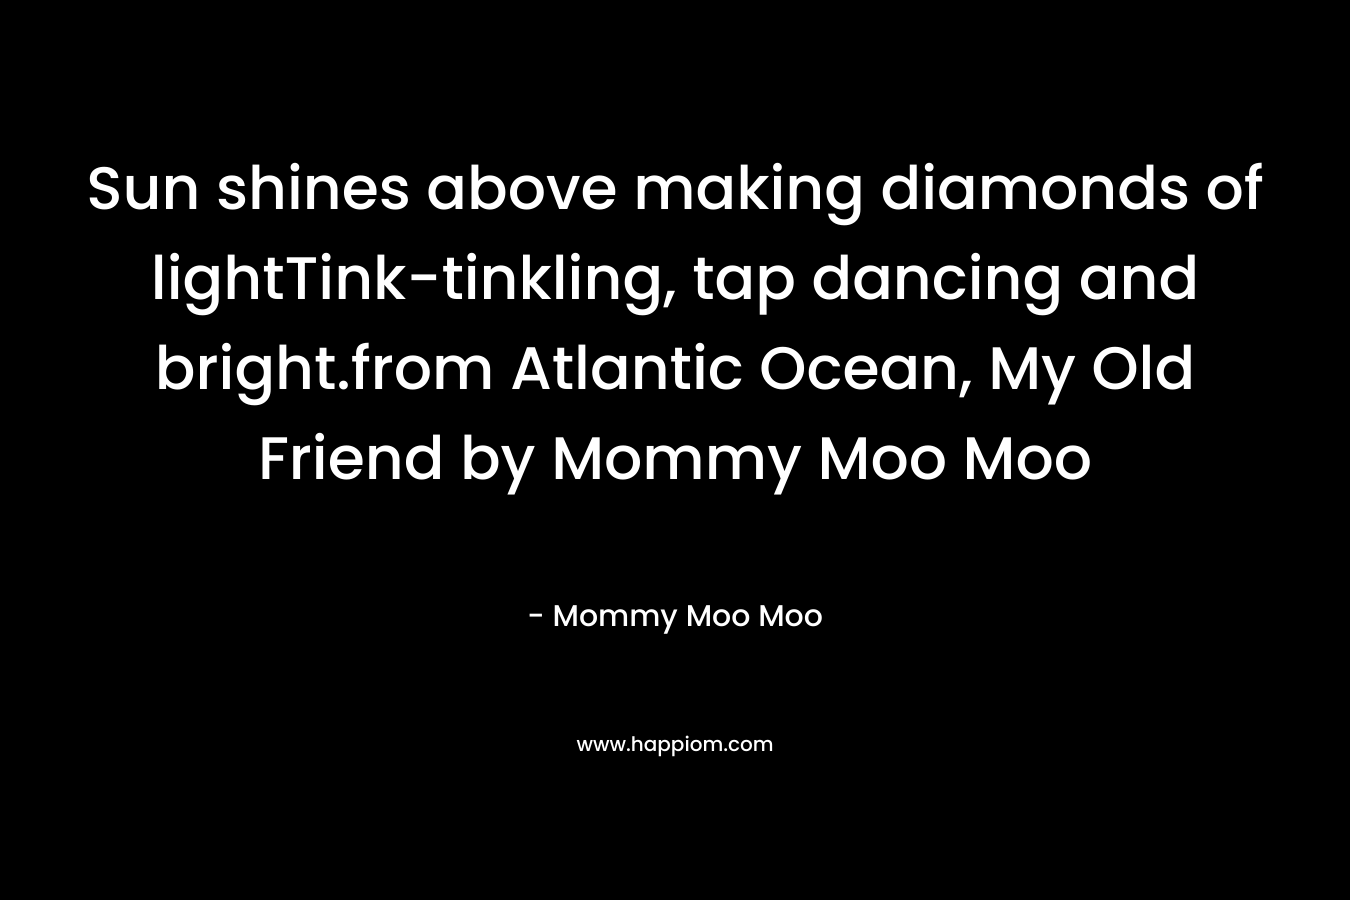 Sun shines above making diamonds of lightTink-tinkling, tap dancing and bright.from Atlantic Ocean, My Old Friend by Mommy Moo Moo – Mommy Moo Moo